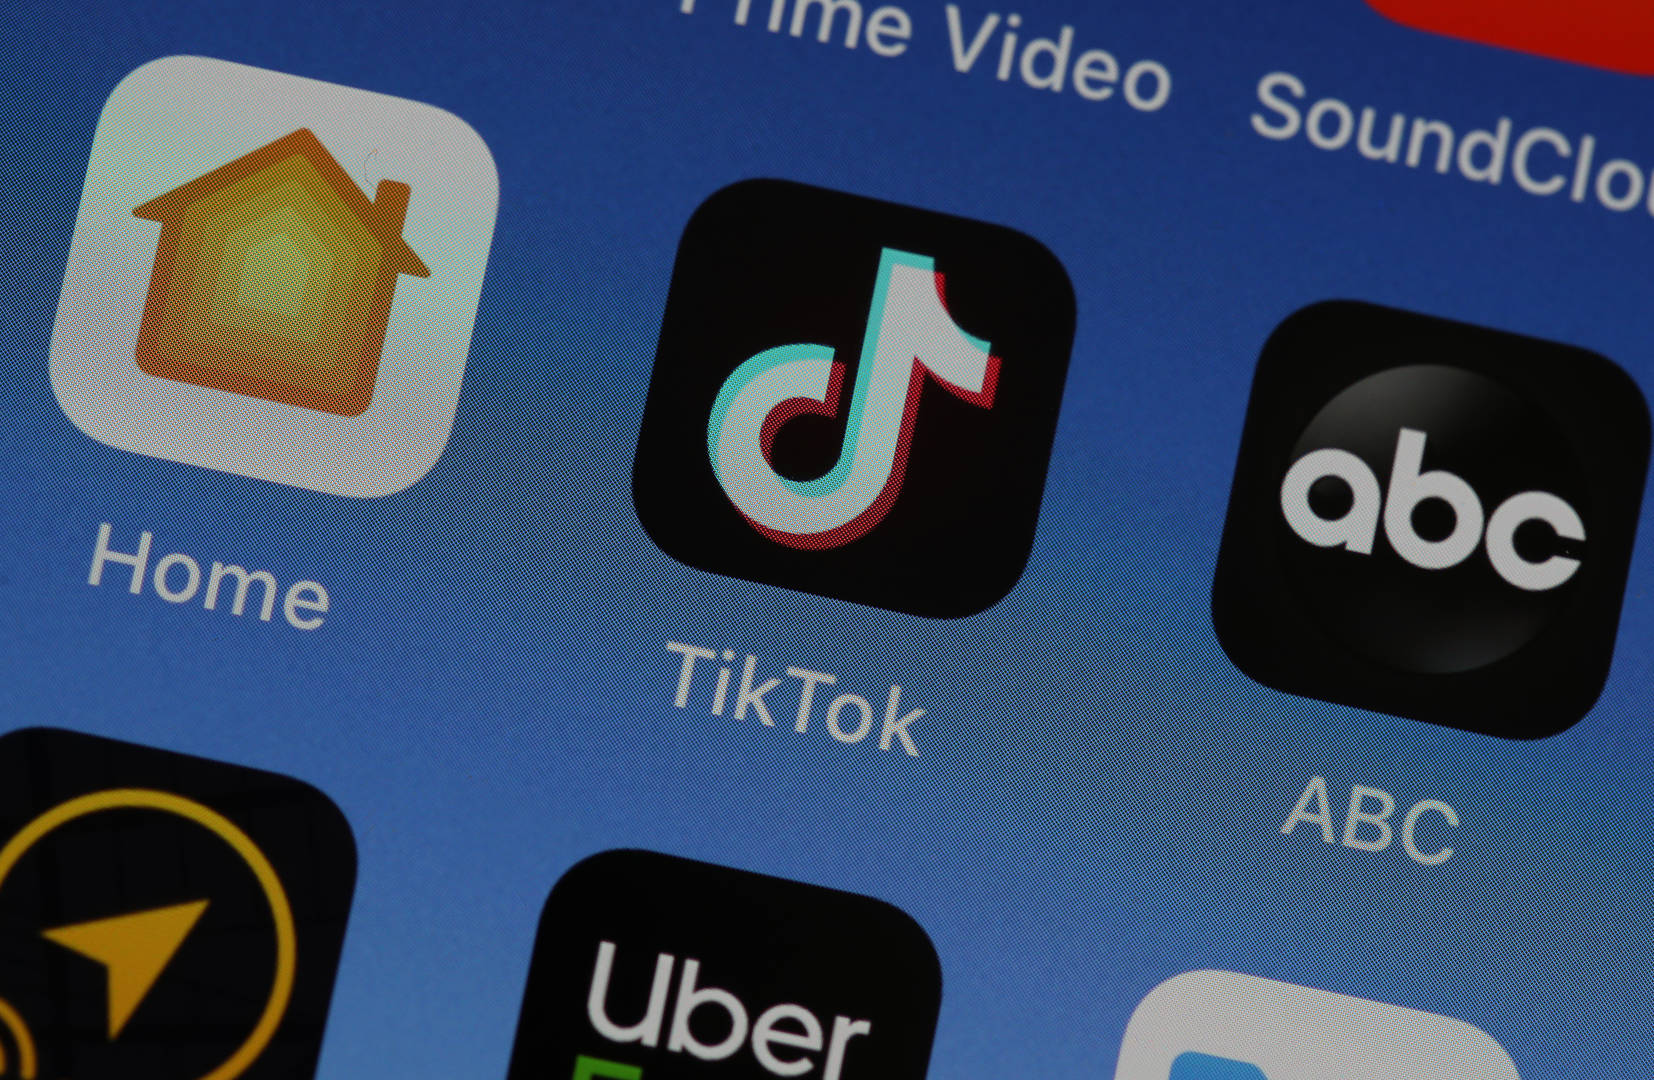 TikTok May Be Getting Banned In The U.S.